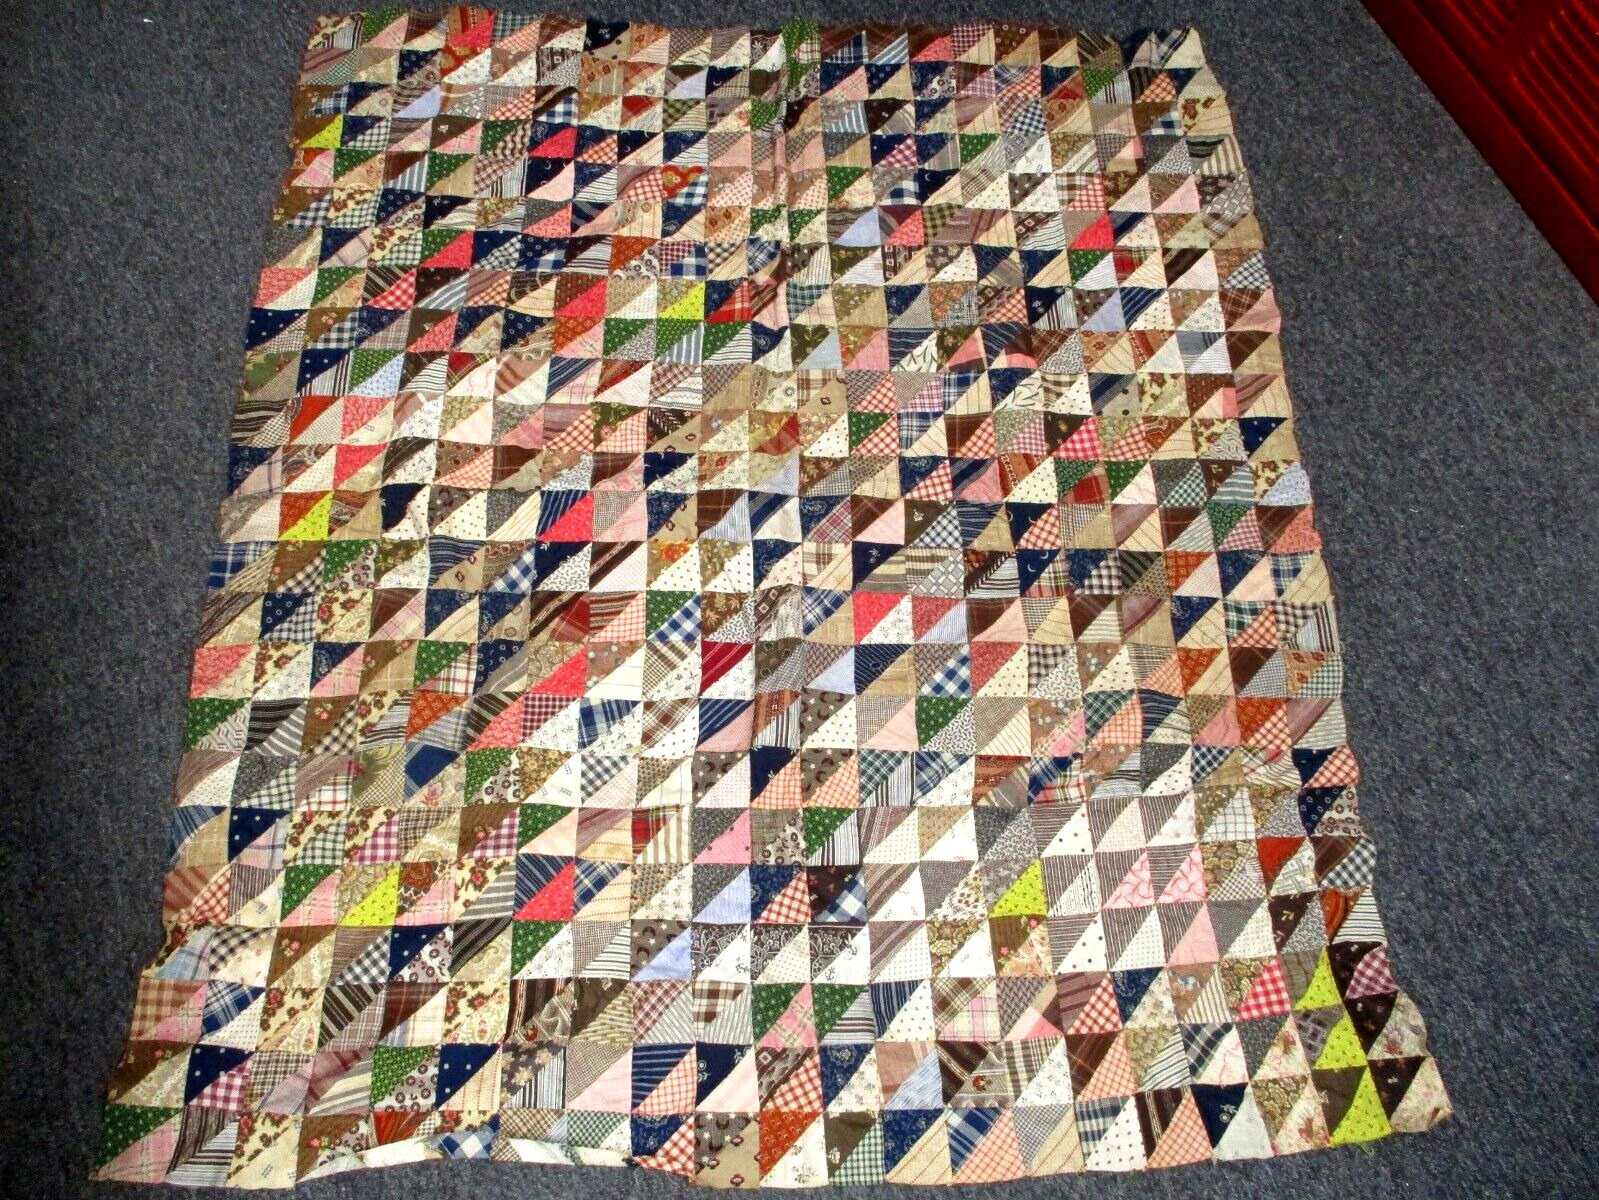 ANTIQUE 1920s HAND STITCHED PATCHWORK BABY CRIB SIZE QUILT 38